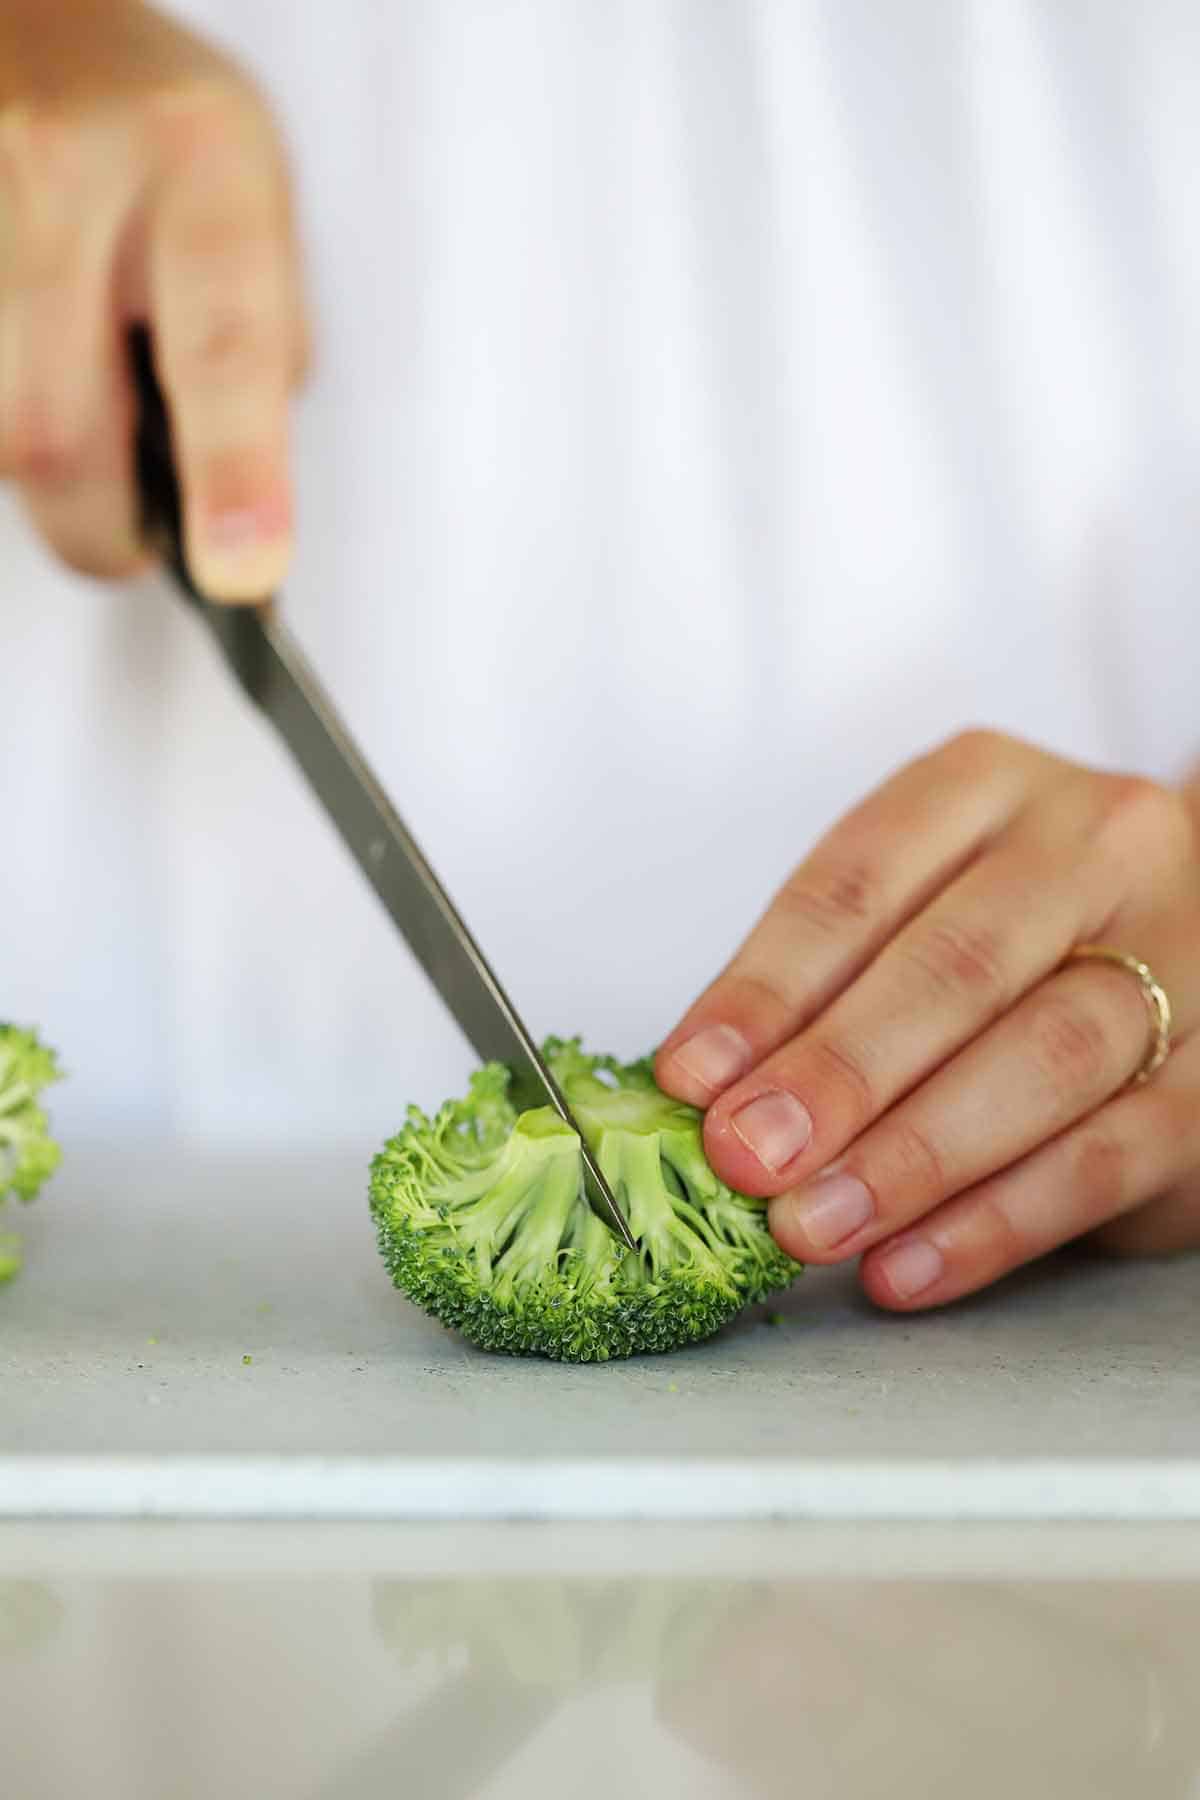 Slicing a small floret of broccoli into two pieces.